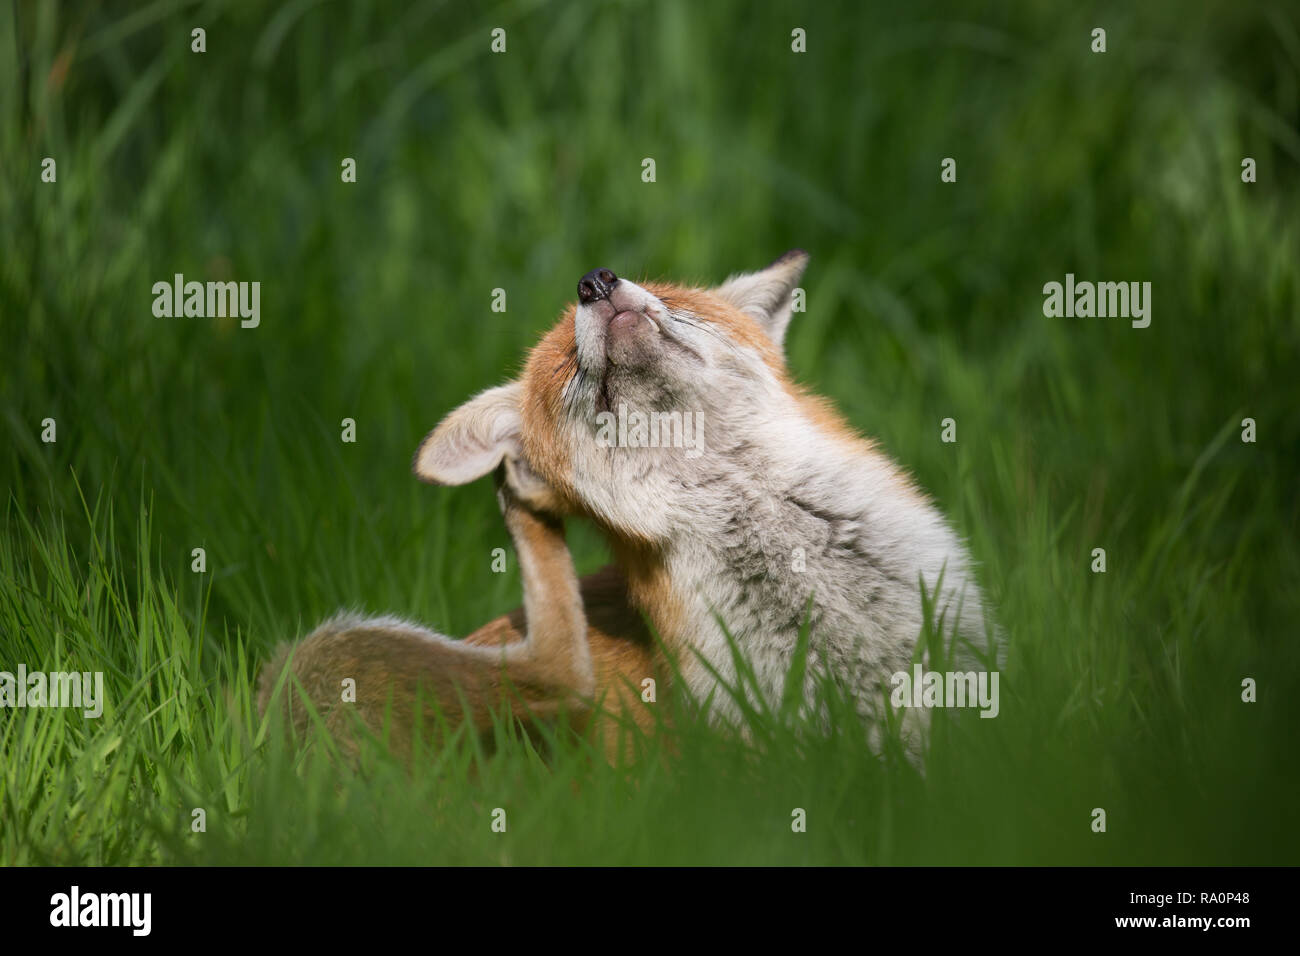 A Red fox scratching in the grass in South West London. Stock Photo